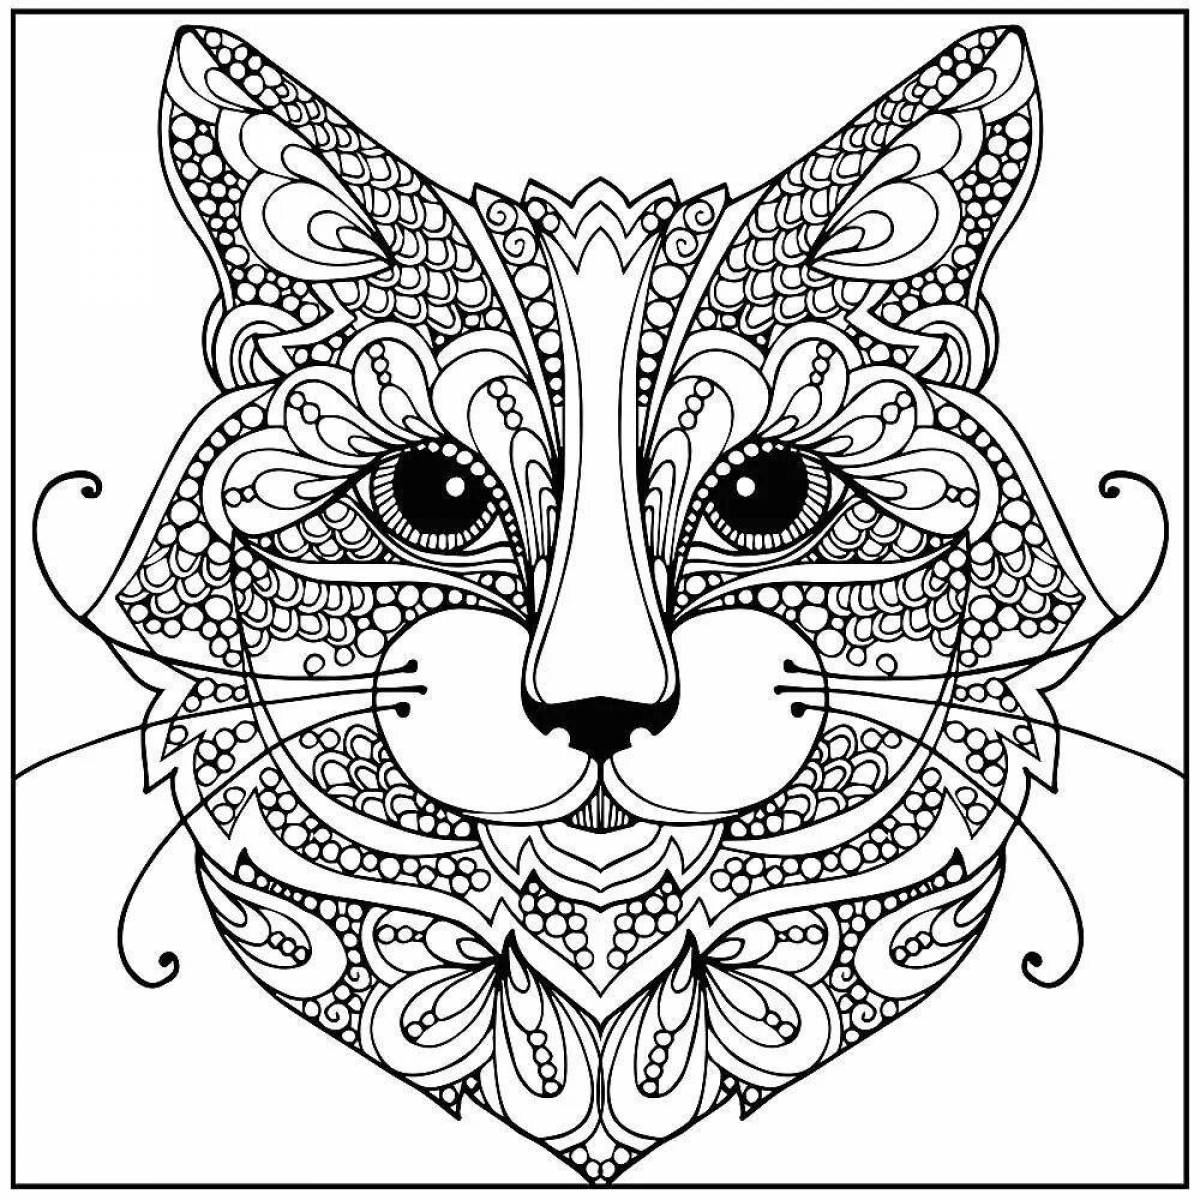 Joyful animal coloring pages